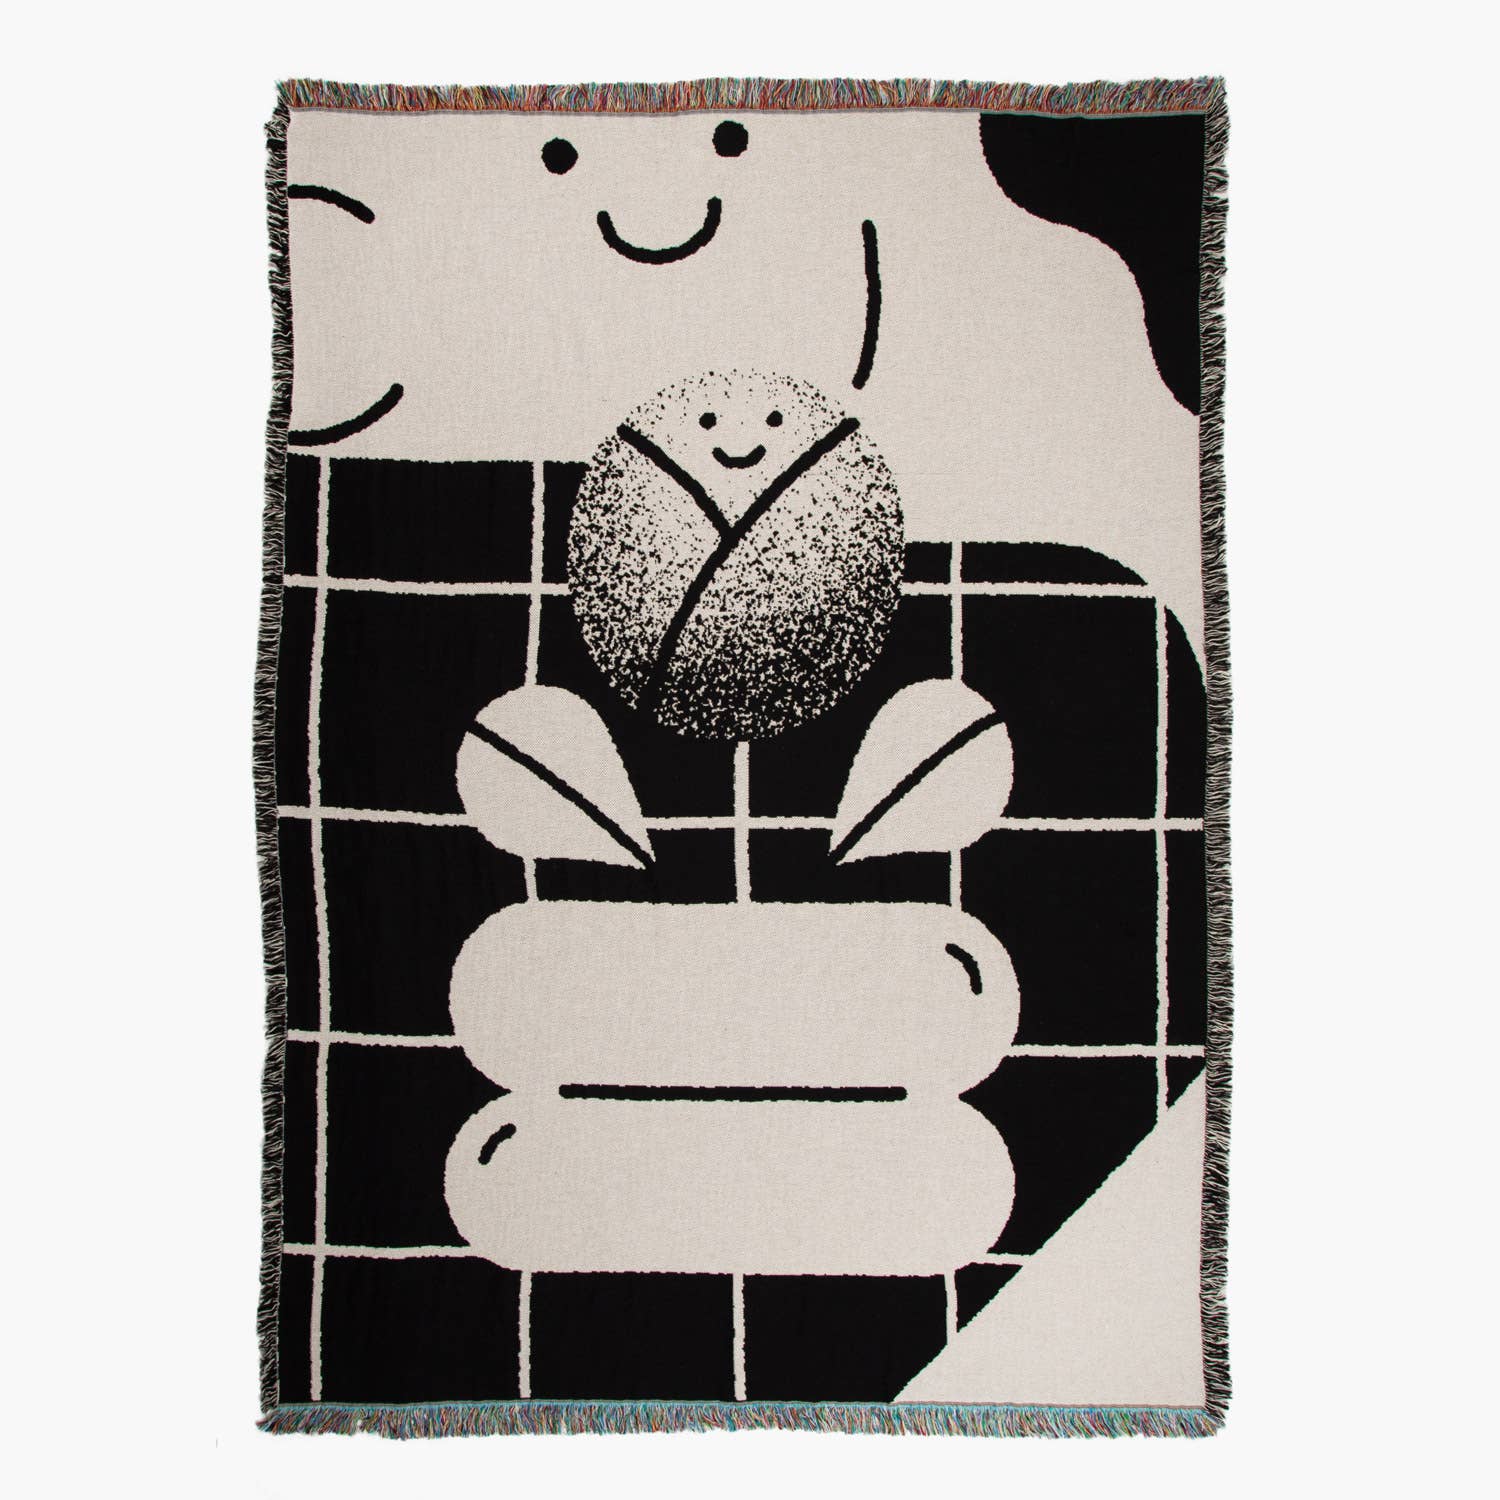 Monochromatic jacquard weave blanket by slowdown studio called "Brando" shows a black & white grid with a small swimming pool, and a ball and cloud with a smiley face